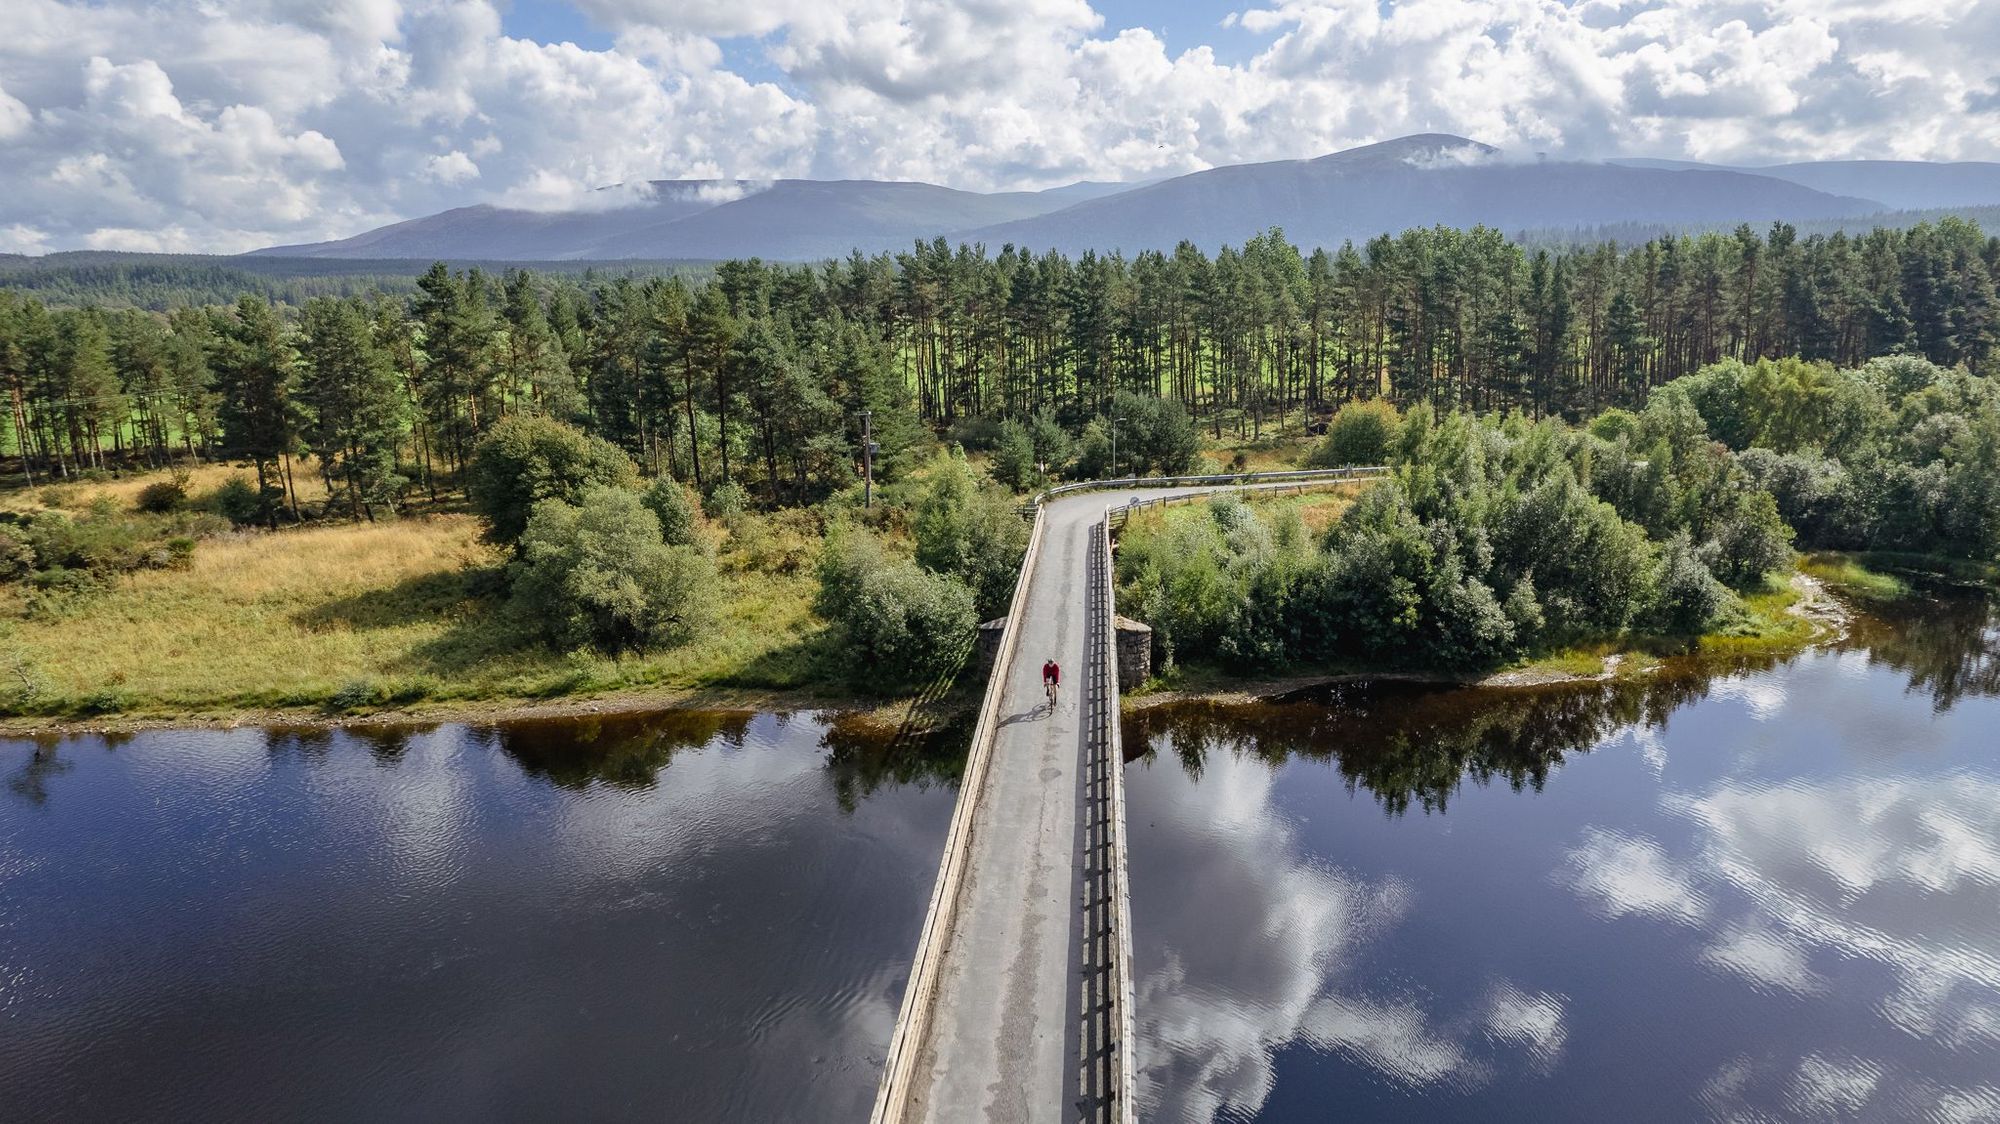 Markus Spitz rides over the River Spey in the Cairngorms. Photo: Markus Stitz.